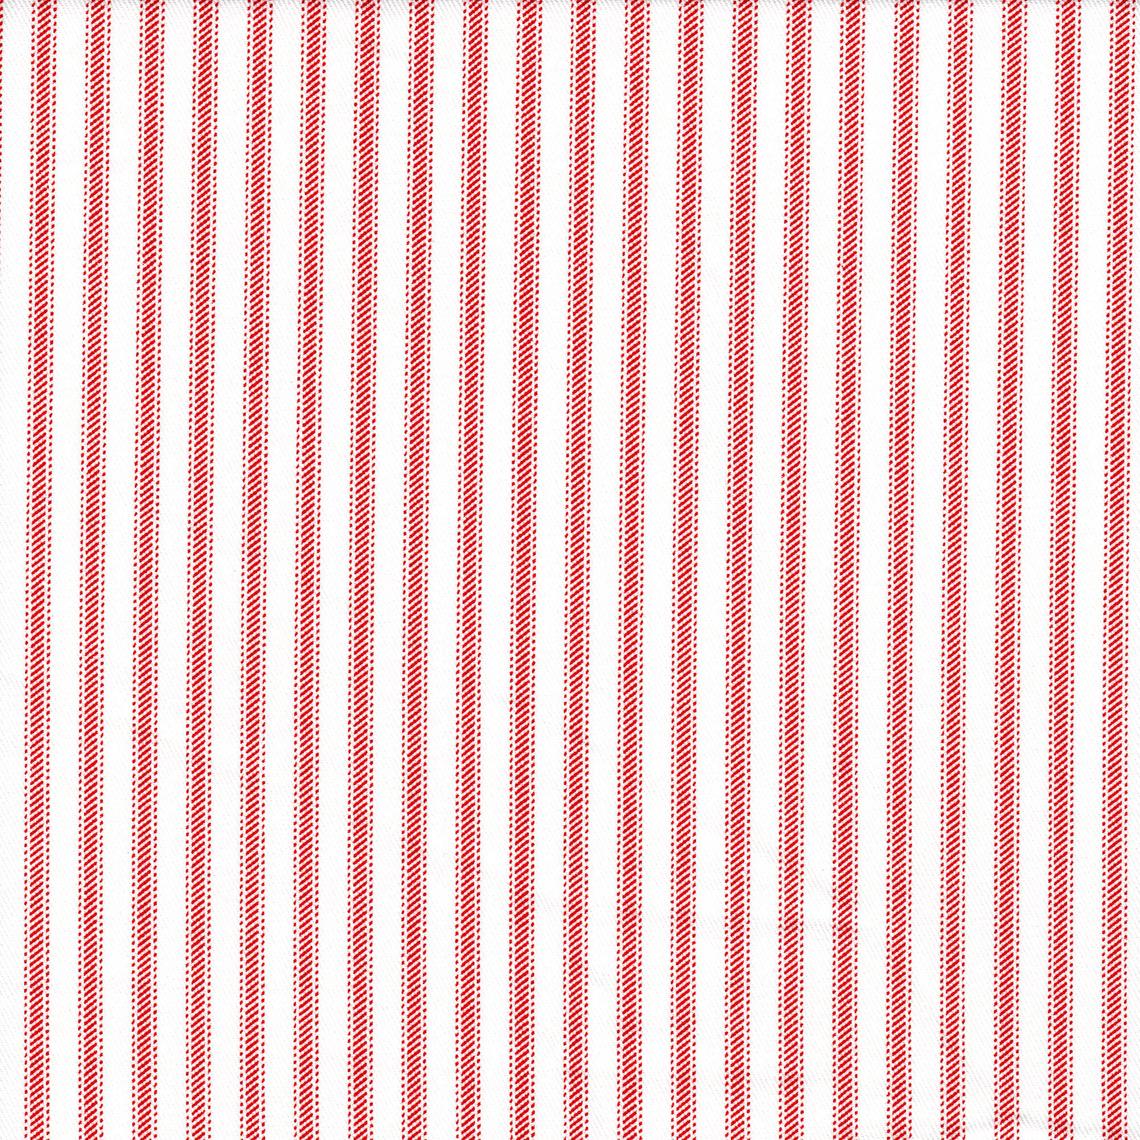 gathered bedskirt in classic lipstick red ticking stripe on white